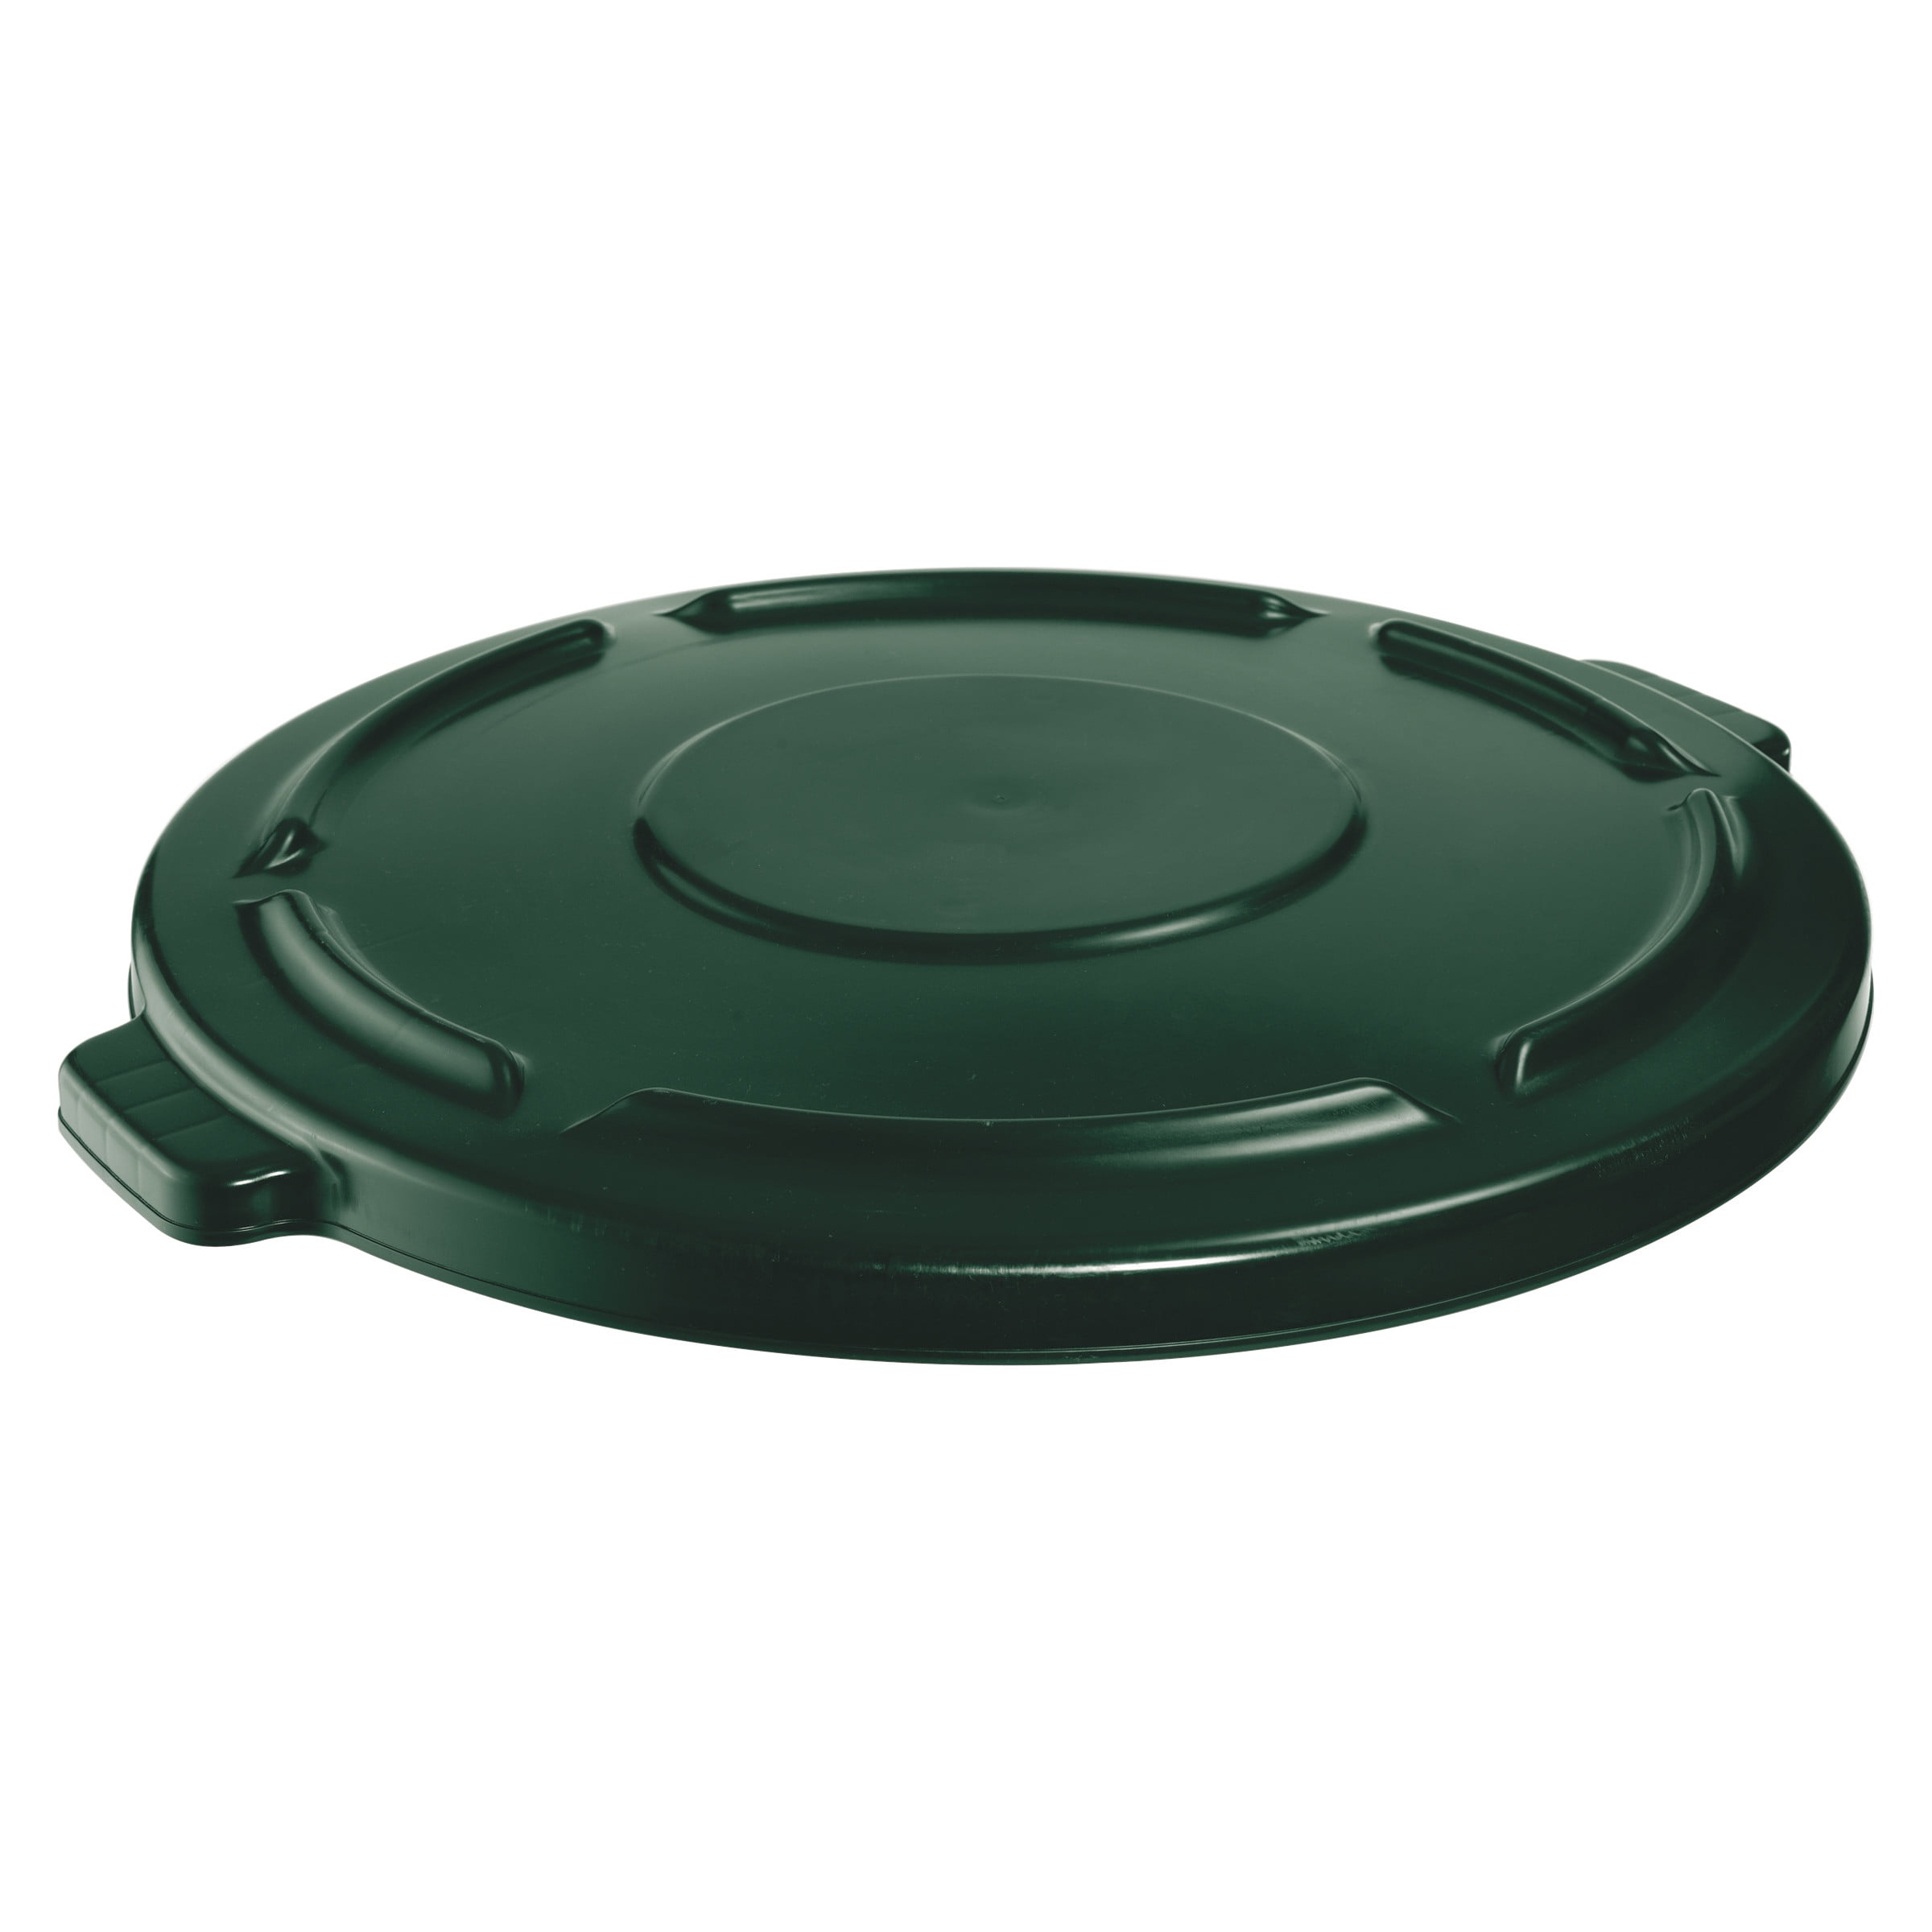 Details about   Rubbermaid Commercial Vented Round Brute Lid 24 1/2 x 1 1/2 Gray 264560GY 